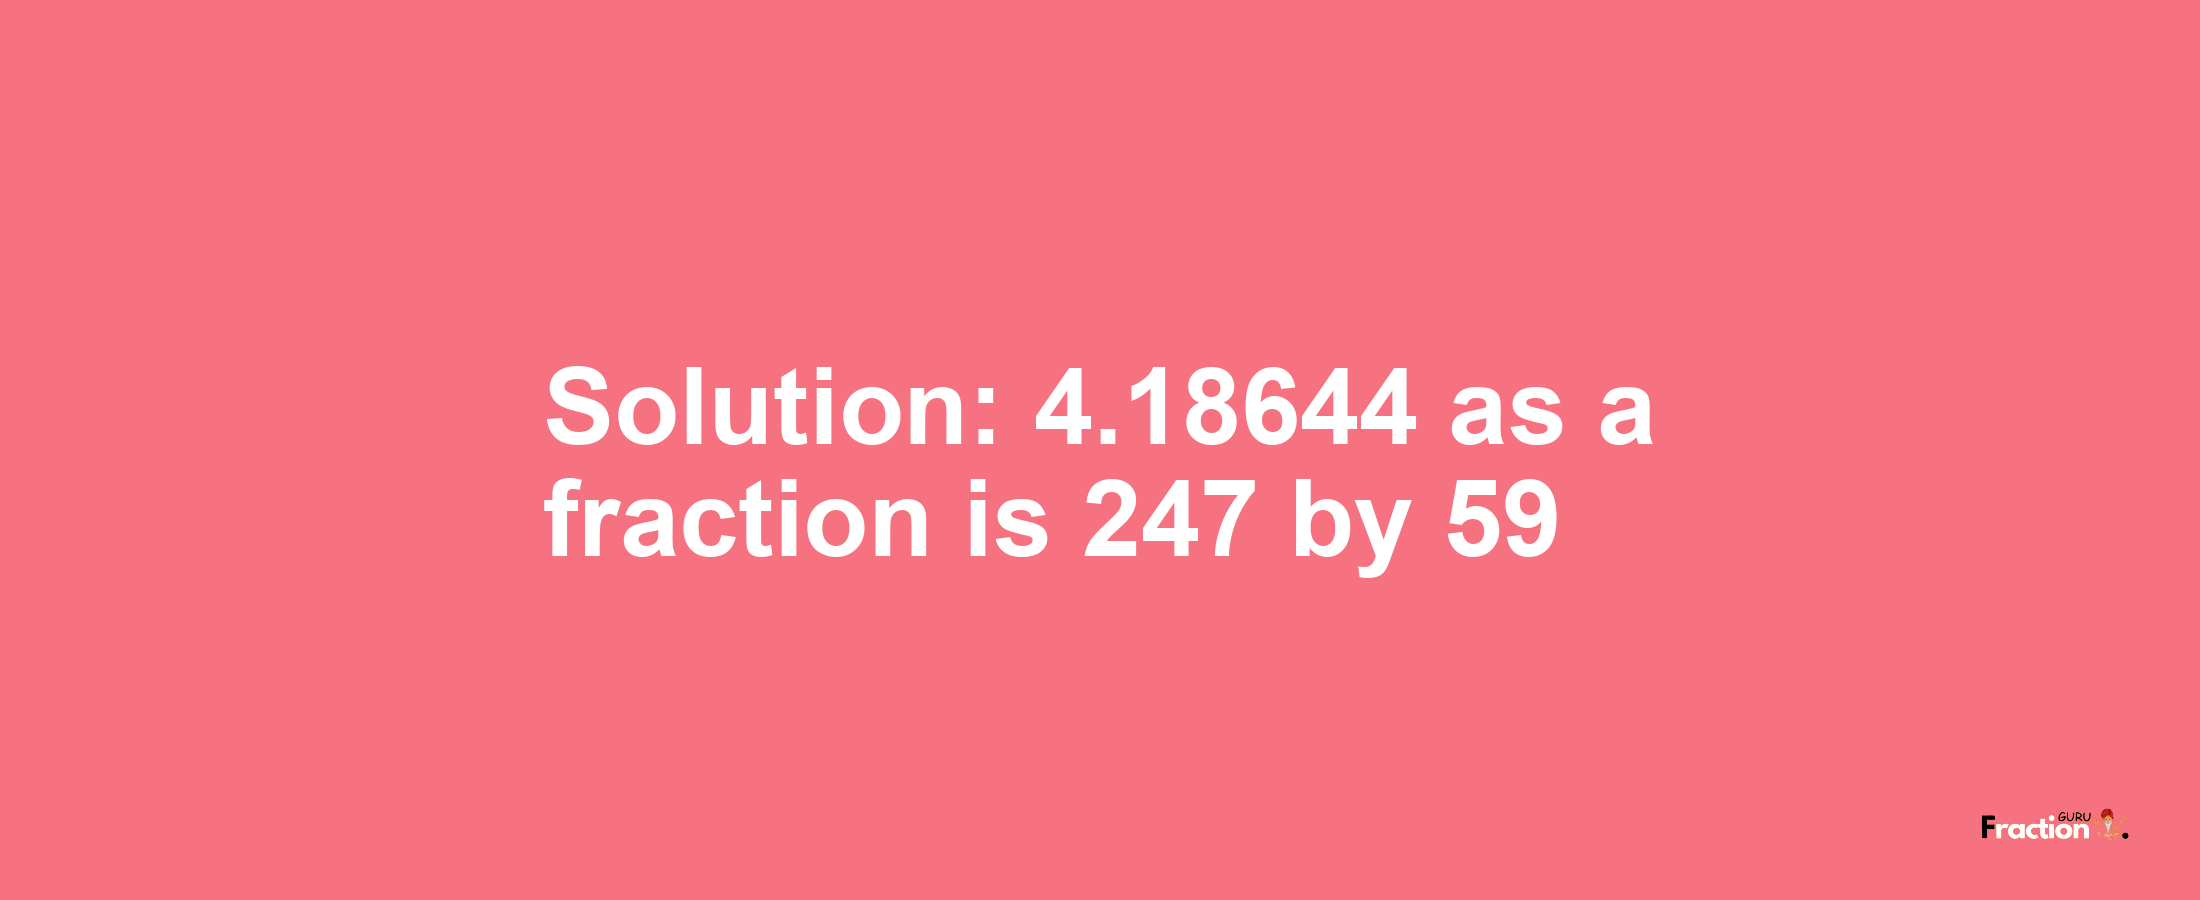 Solution:4.18644 as a fraction is 247/59